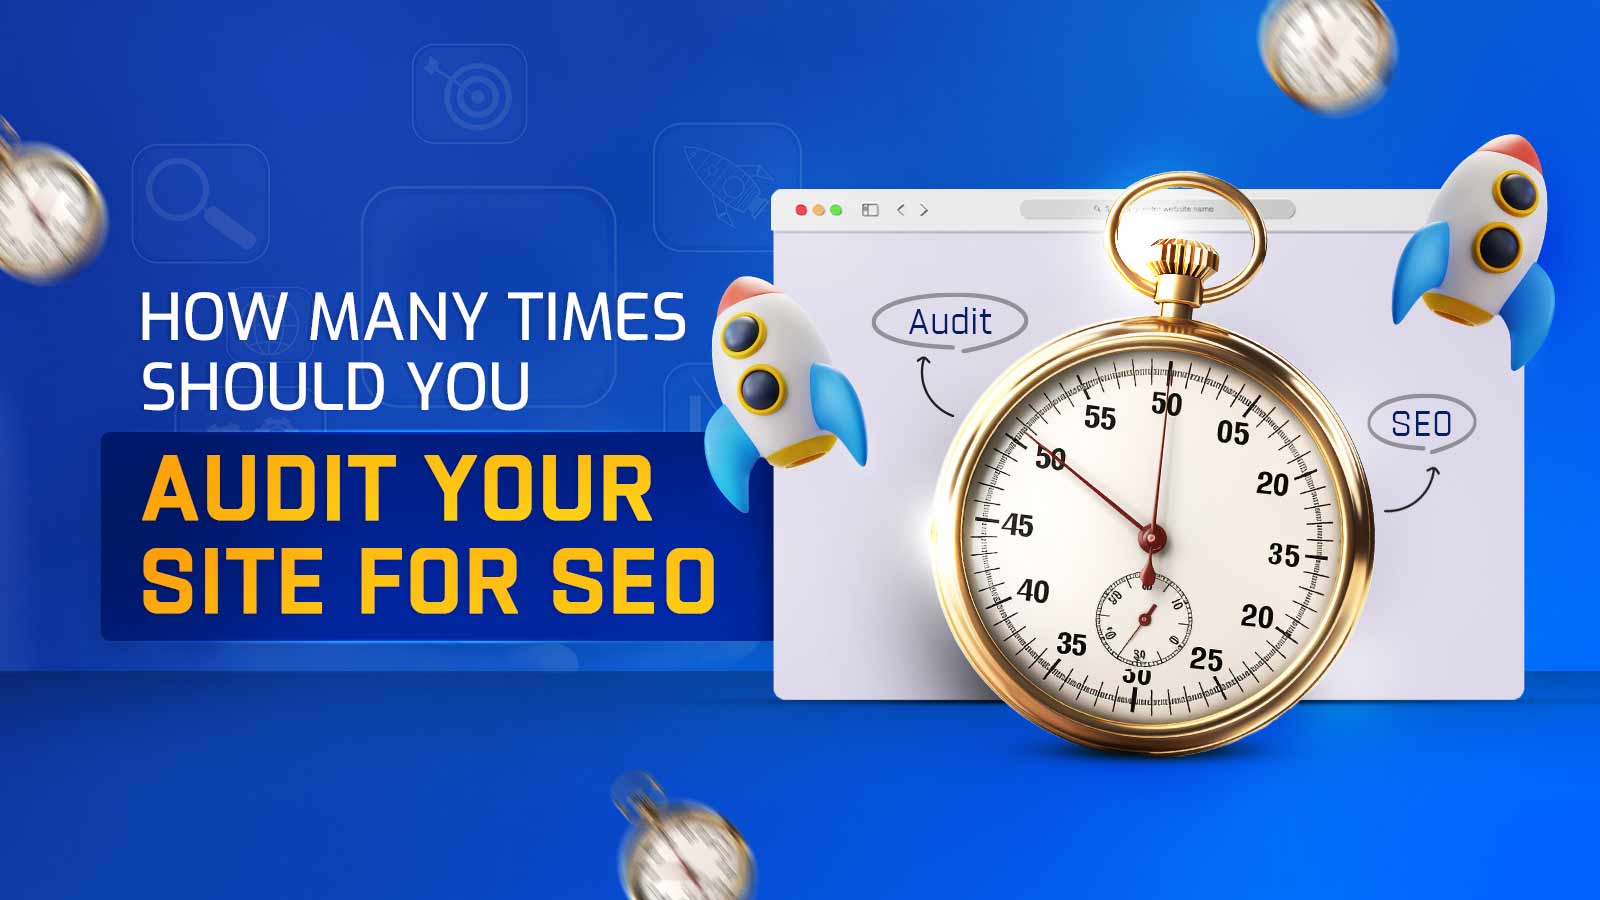 How Many Times Should You Audit Your Site For SEO? How To Do It?